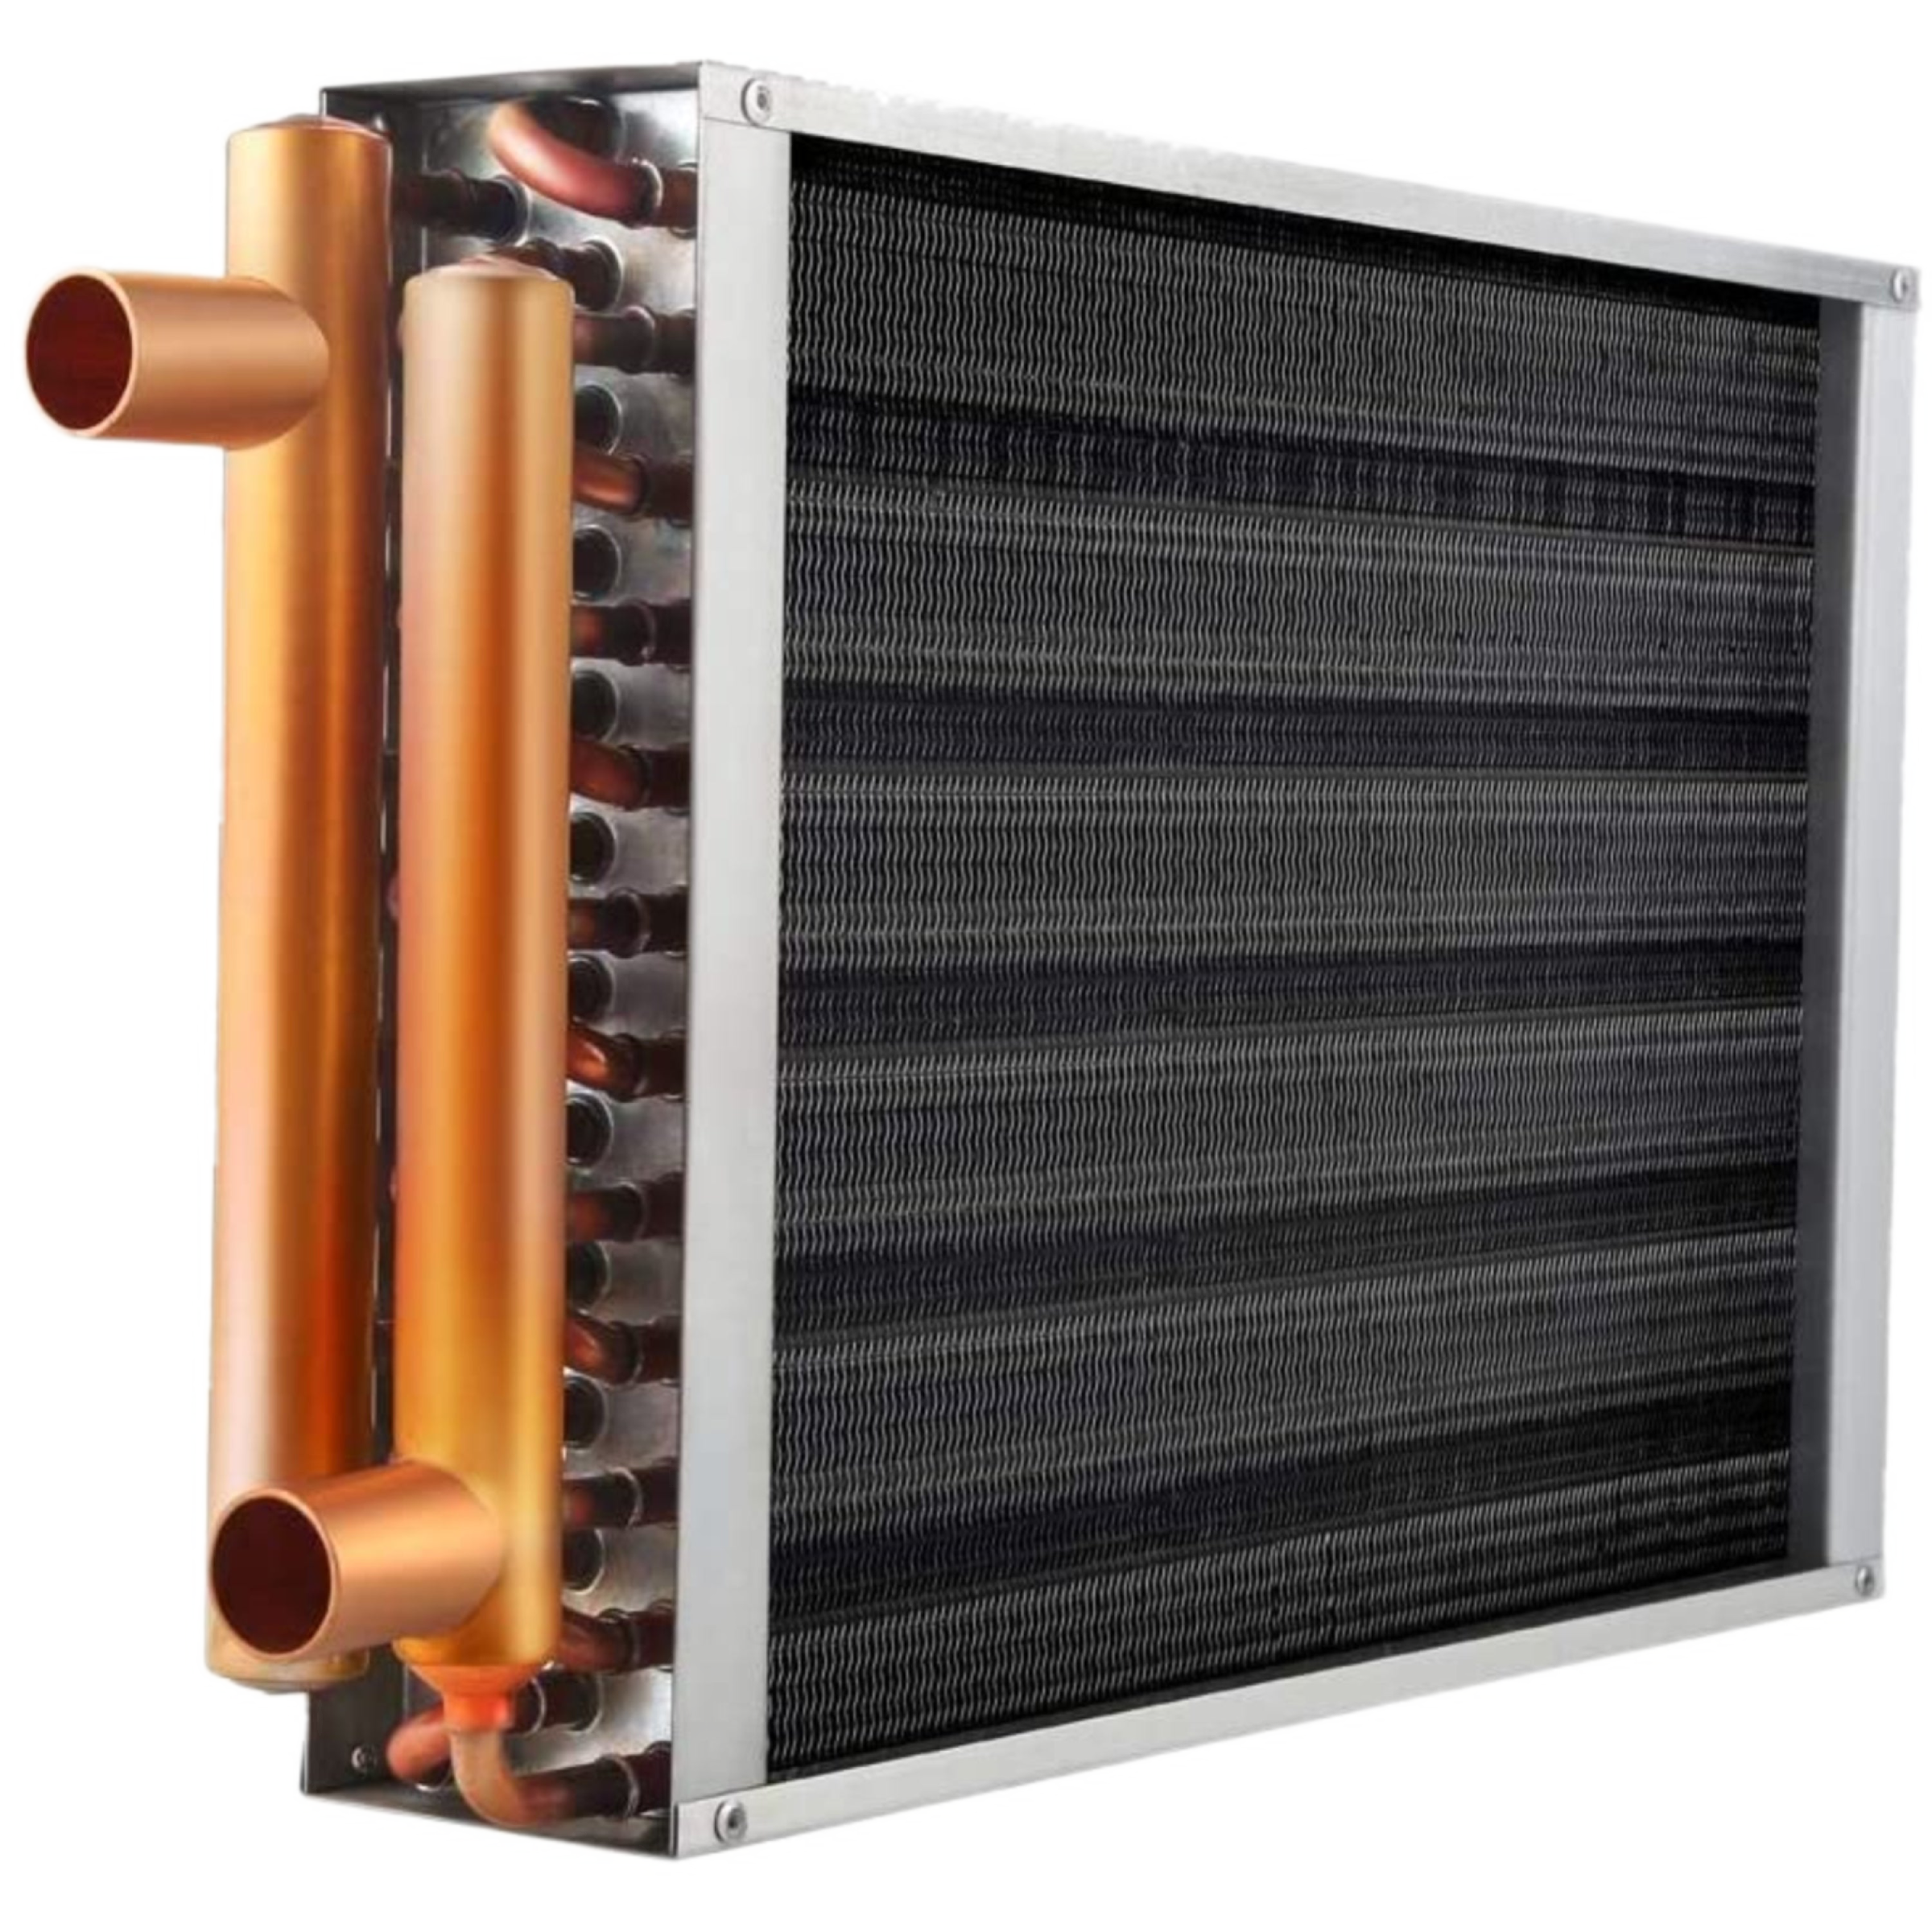 HTL 22 X 25 Hydronic Coil Air to Water Heat Exchanger 23GPM, PD 2.77 PSI, 200475 BTU/h to 220000 BTU/h